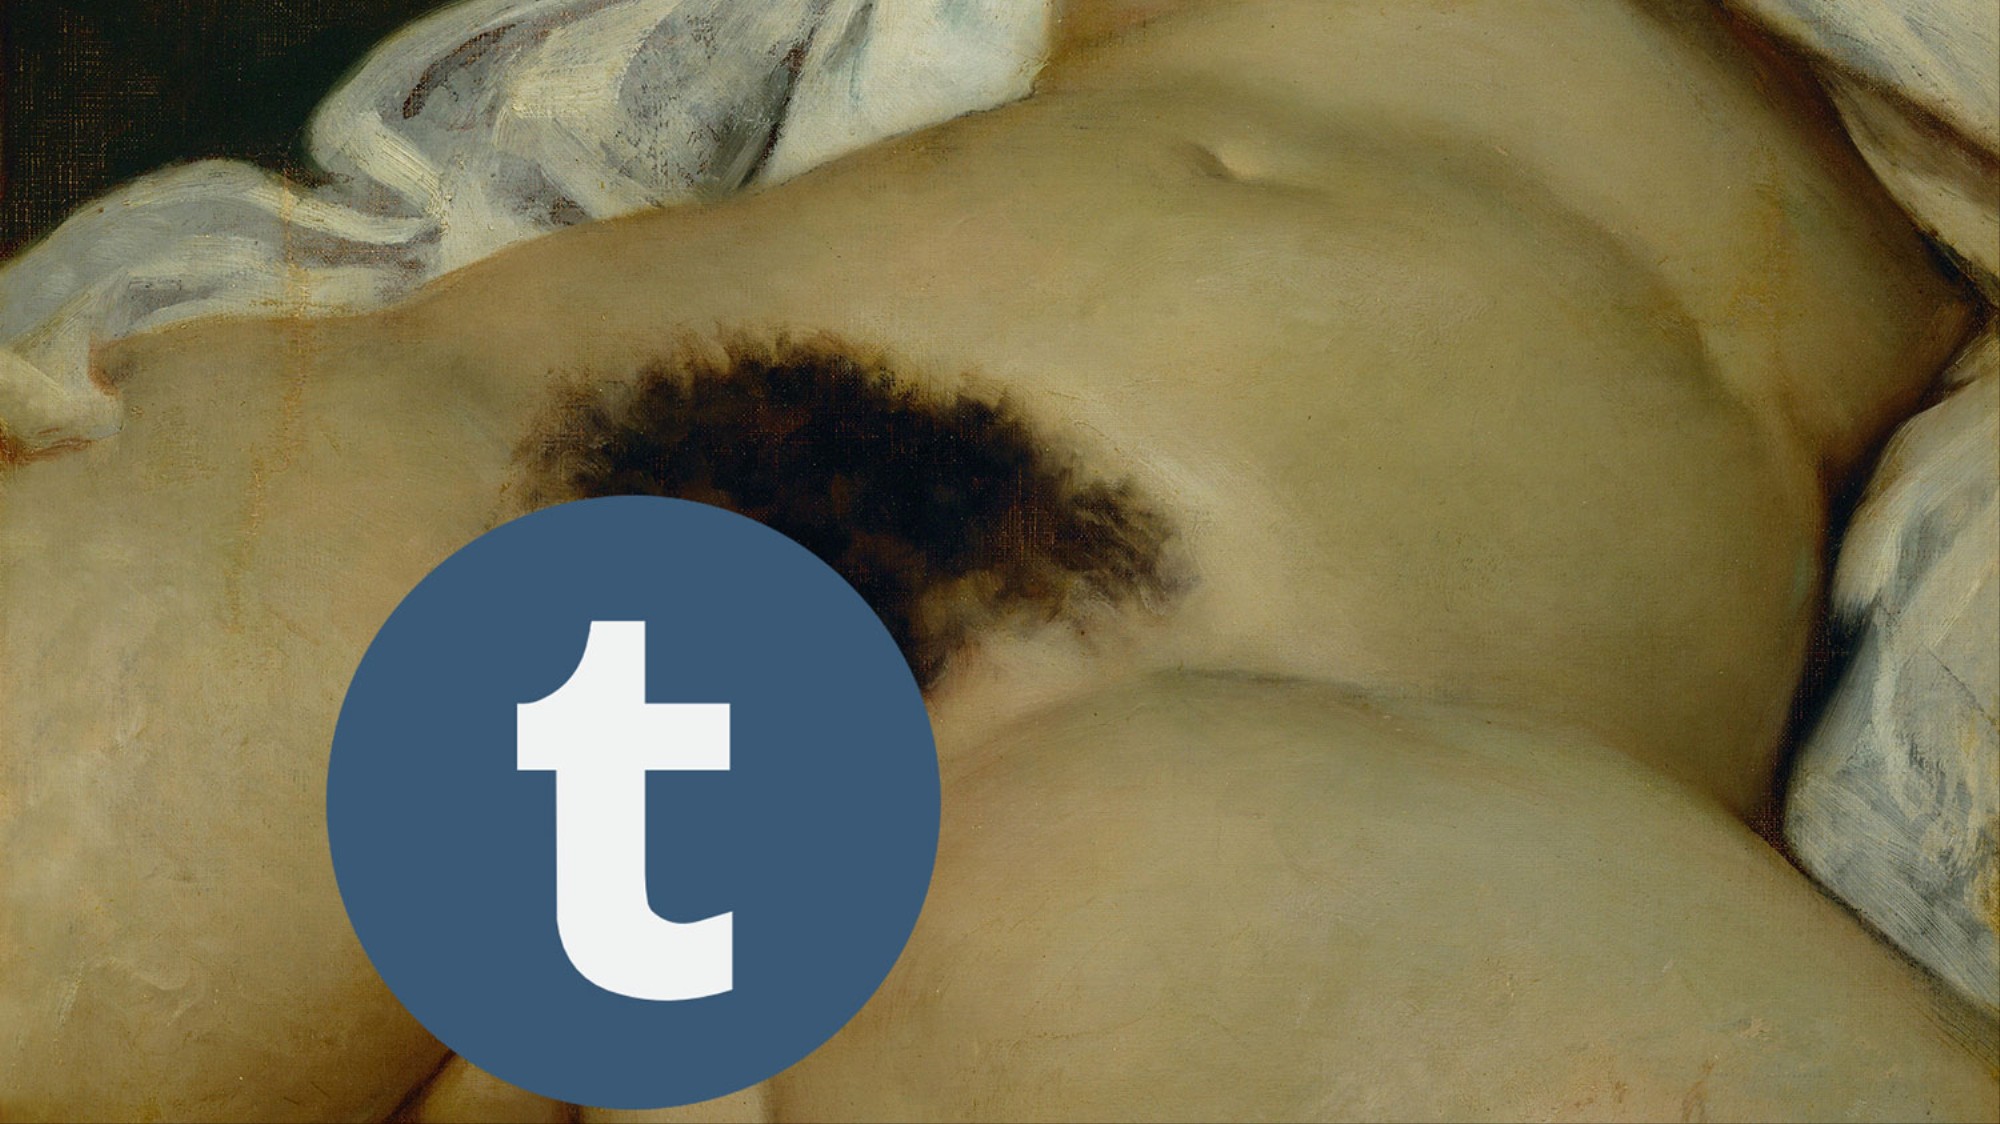 Amazing Porn Tumblr - Sex Bloggers Say Tumblr Is 'as Good as Gone' After Porn Ban ...